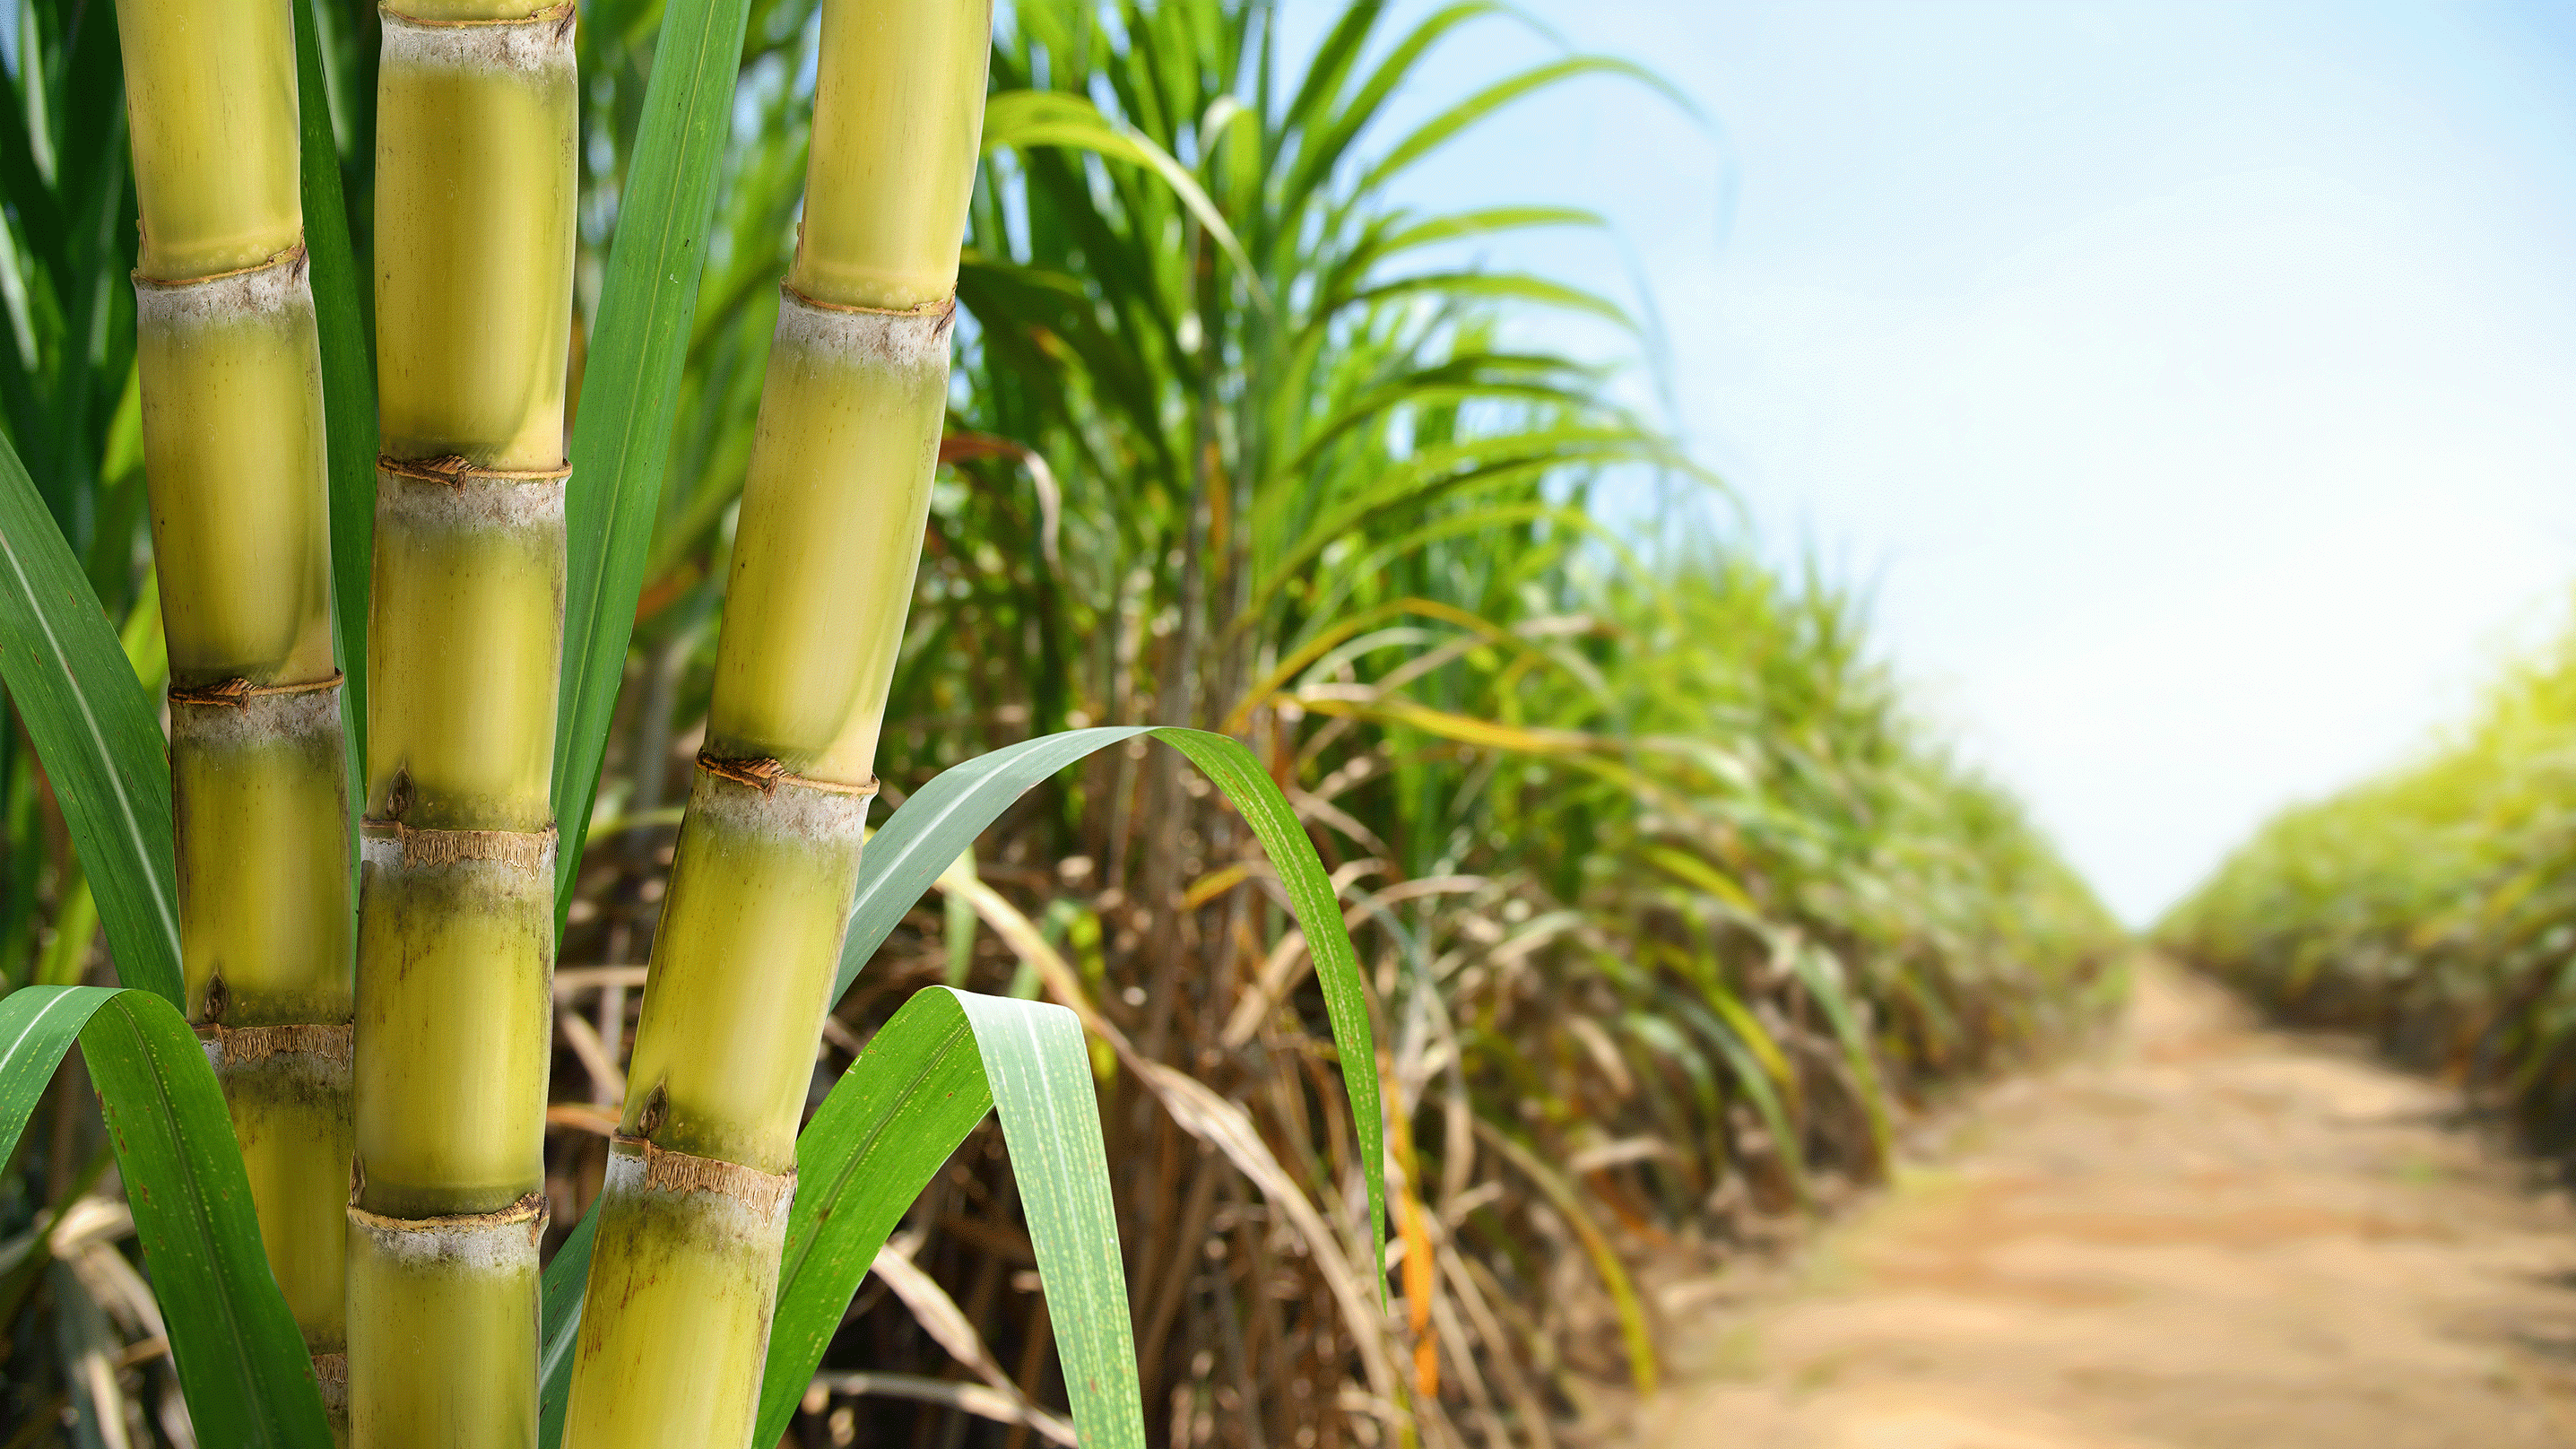 Three sugarcane stalks in the foreground with sugarcane plants in the field behind. 